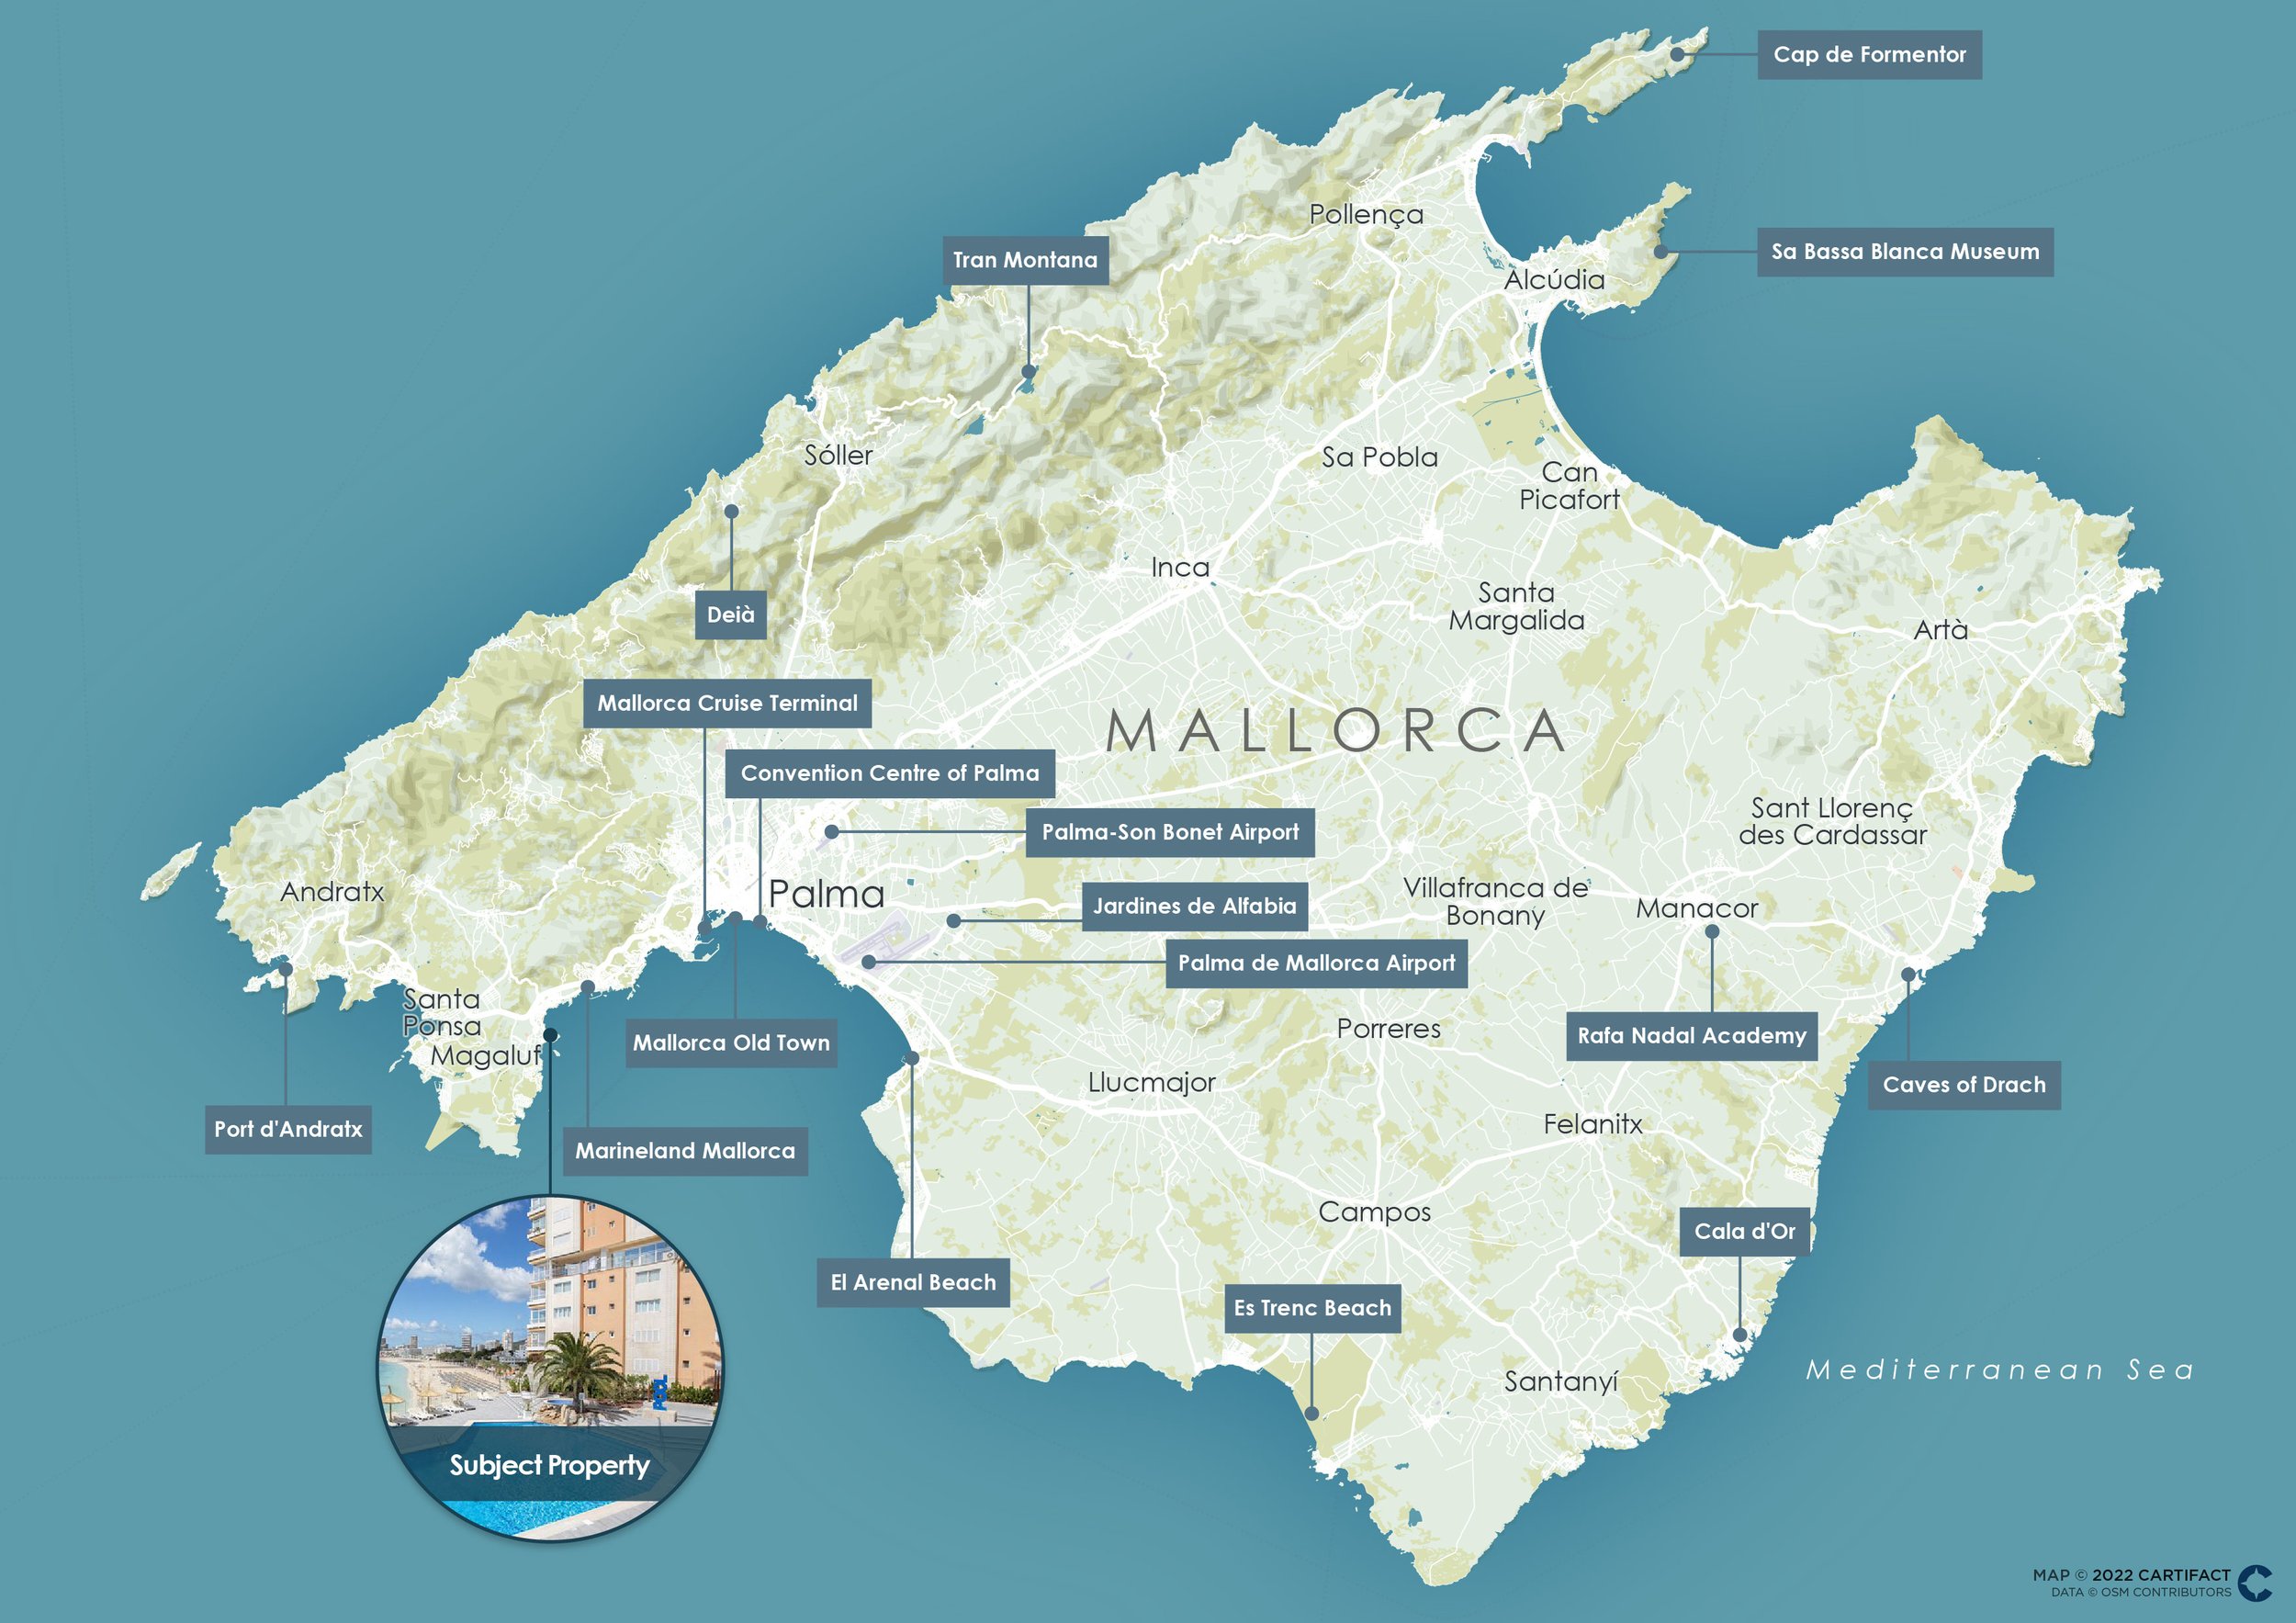 Mallorca Spain Hotel Points of Interest Amenities Attractions Map.jpg